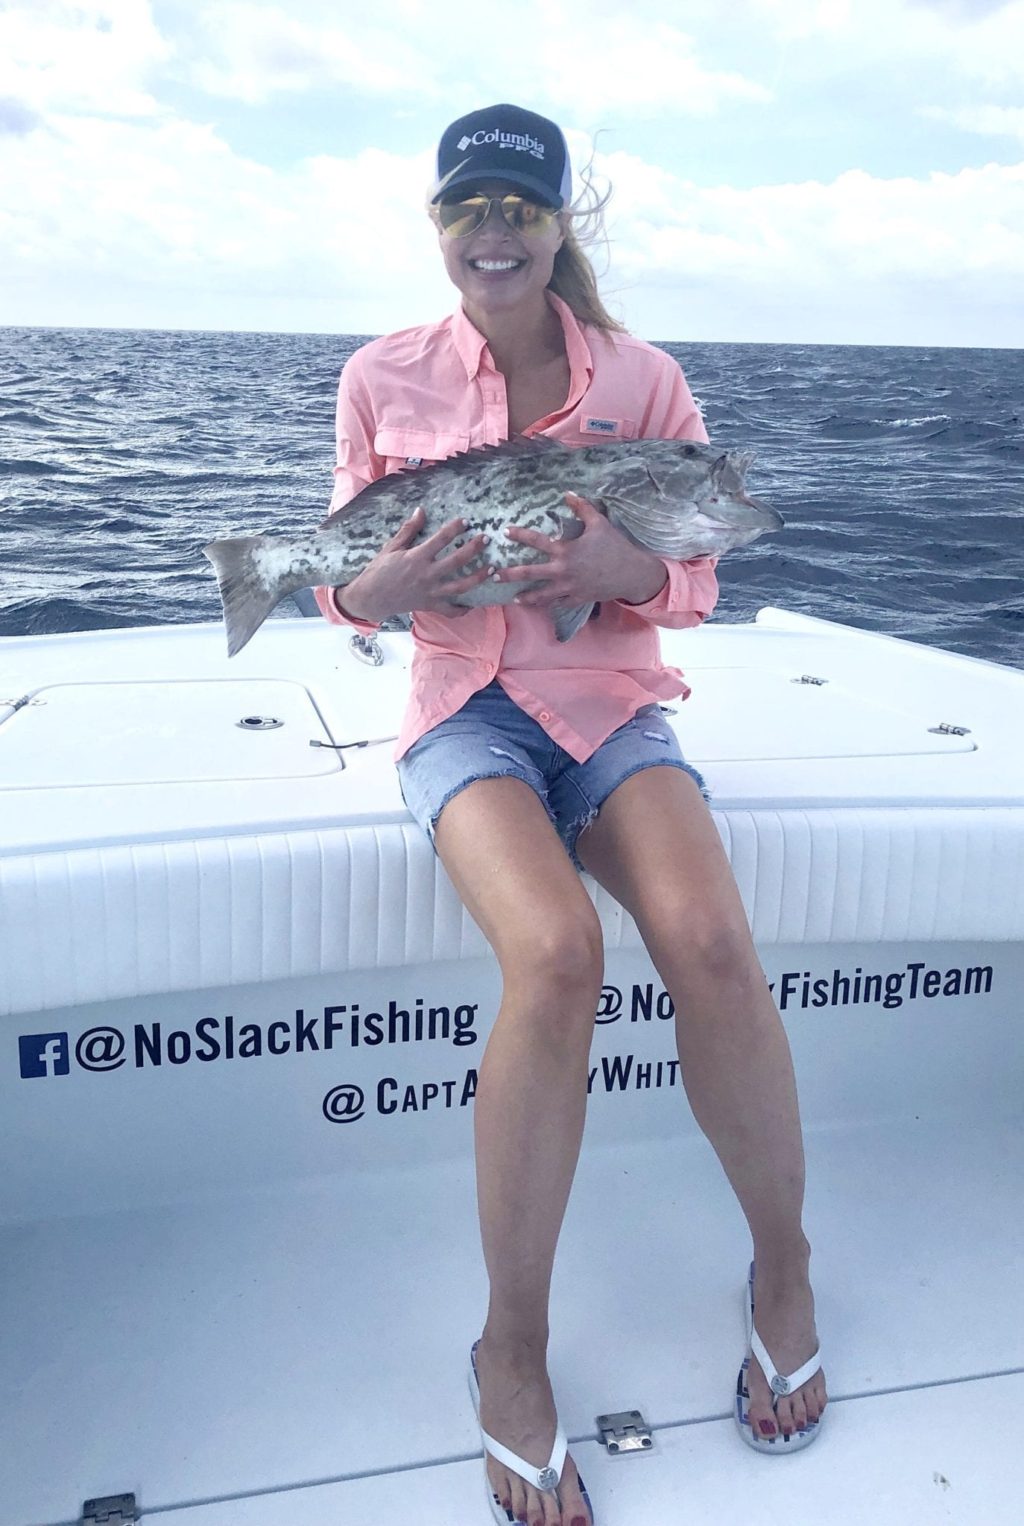 Happy customer on the No Slack Fishing Team catching big grouper and snapper